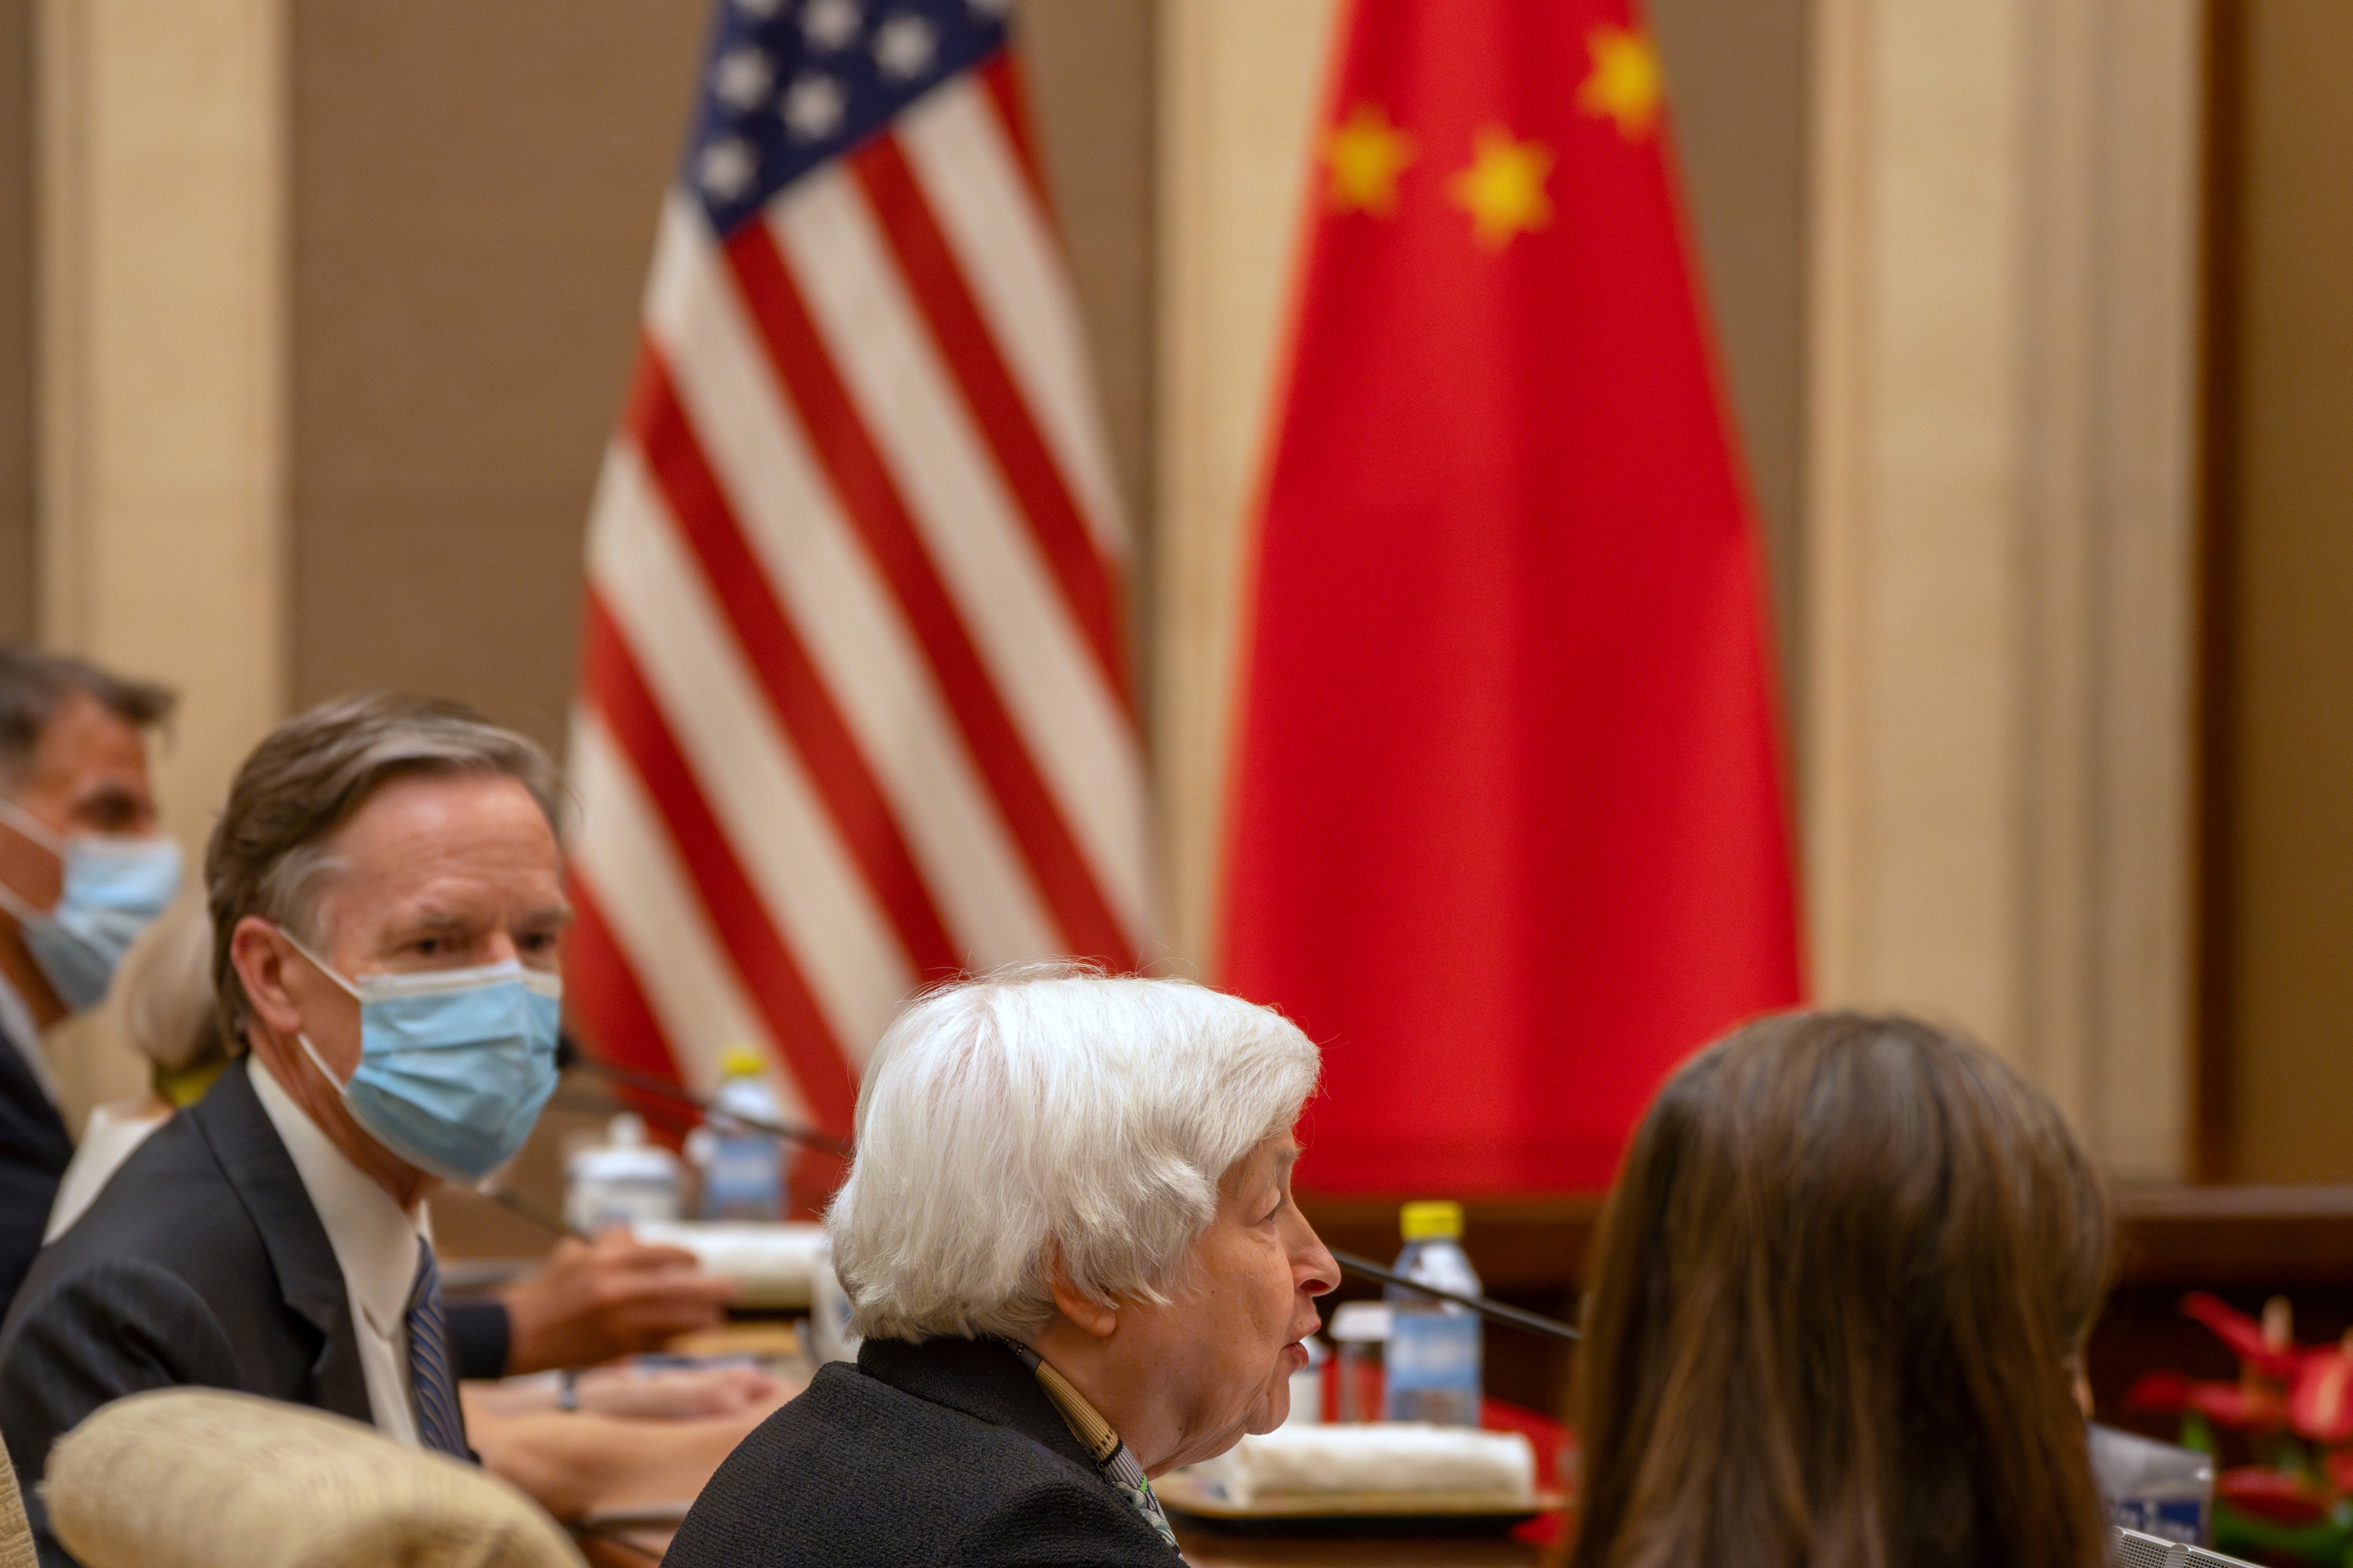 Yellen speaks during a meeting with Chinese Vice Premier He Lifeng (not pictured) at the Diaoyutai State Guesthouse in Beijing on July 8. (Mark Schiefelbein—Pool/Getty Images)